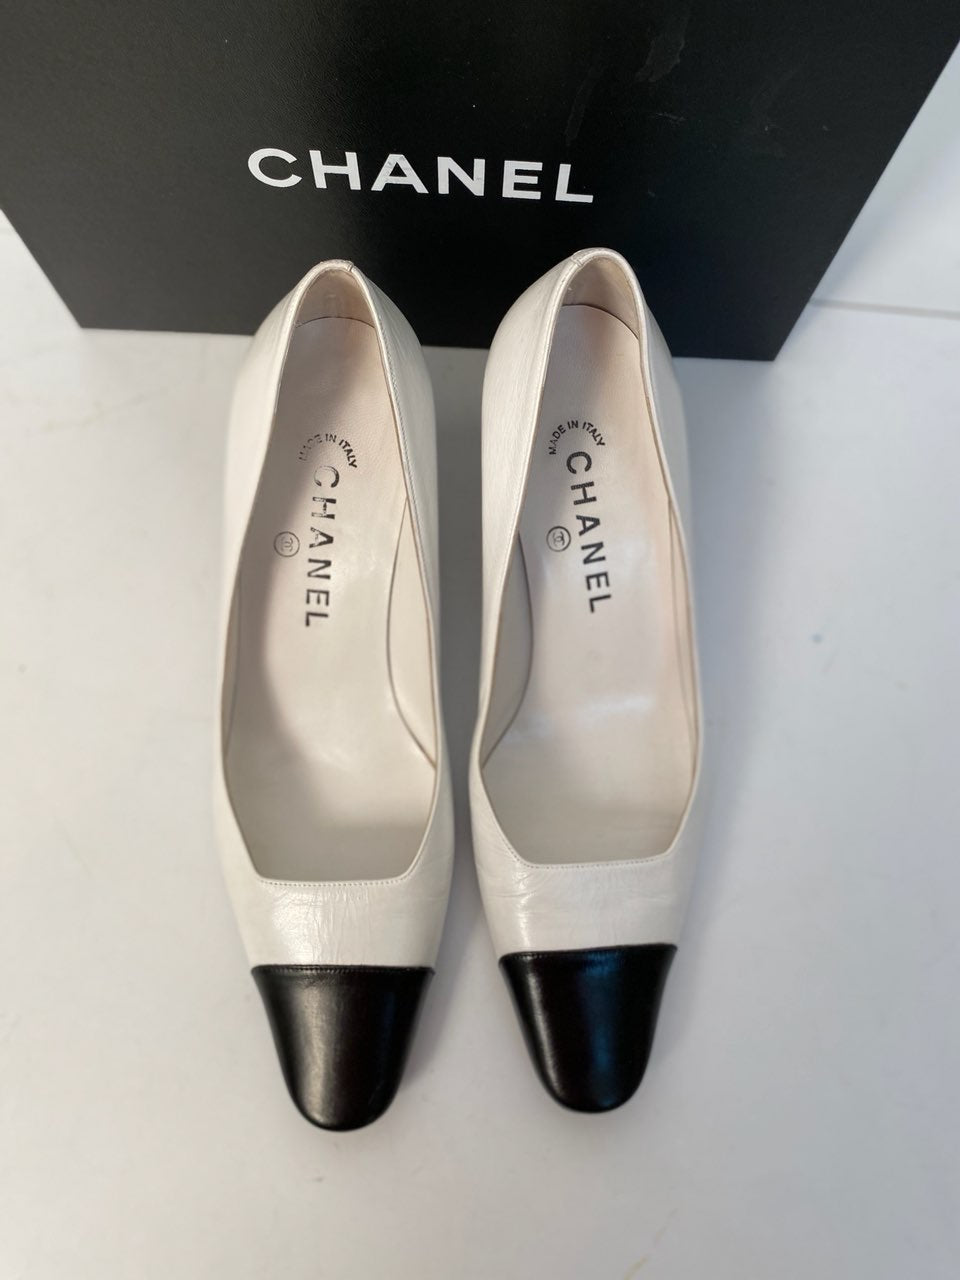 chanel black and white pumps